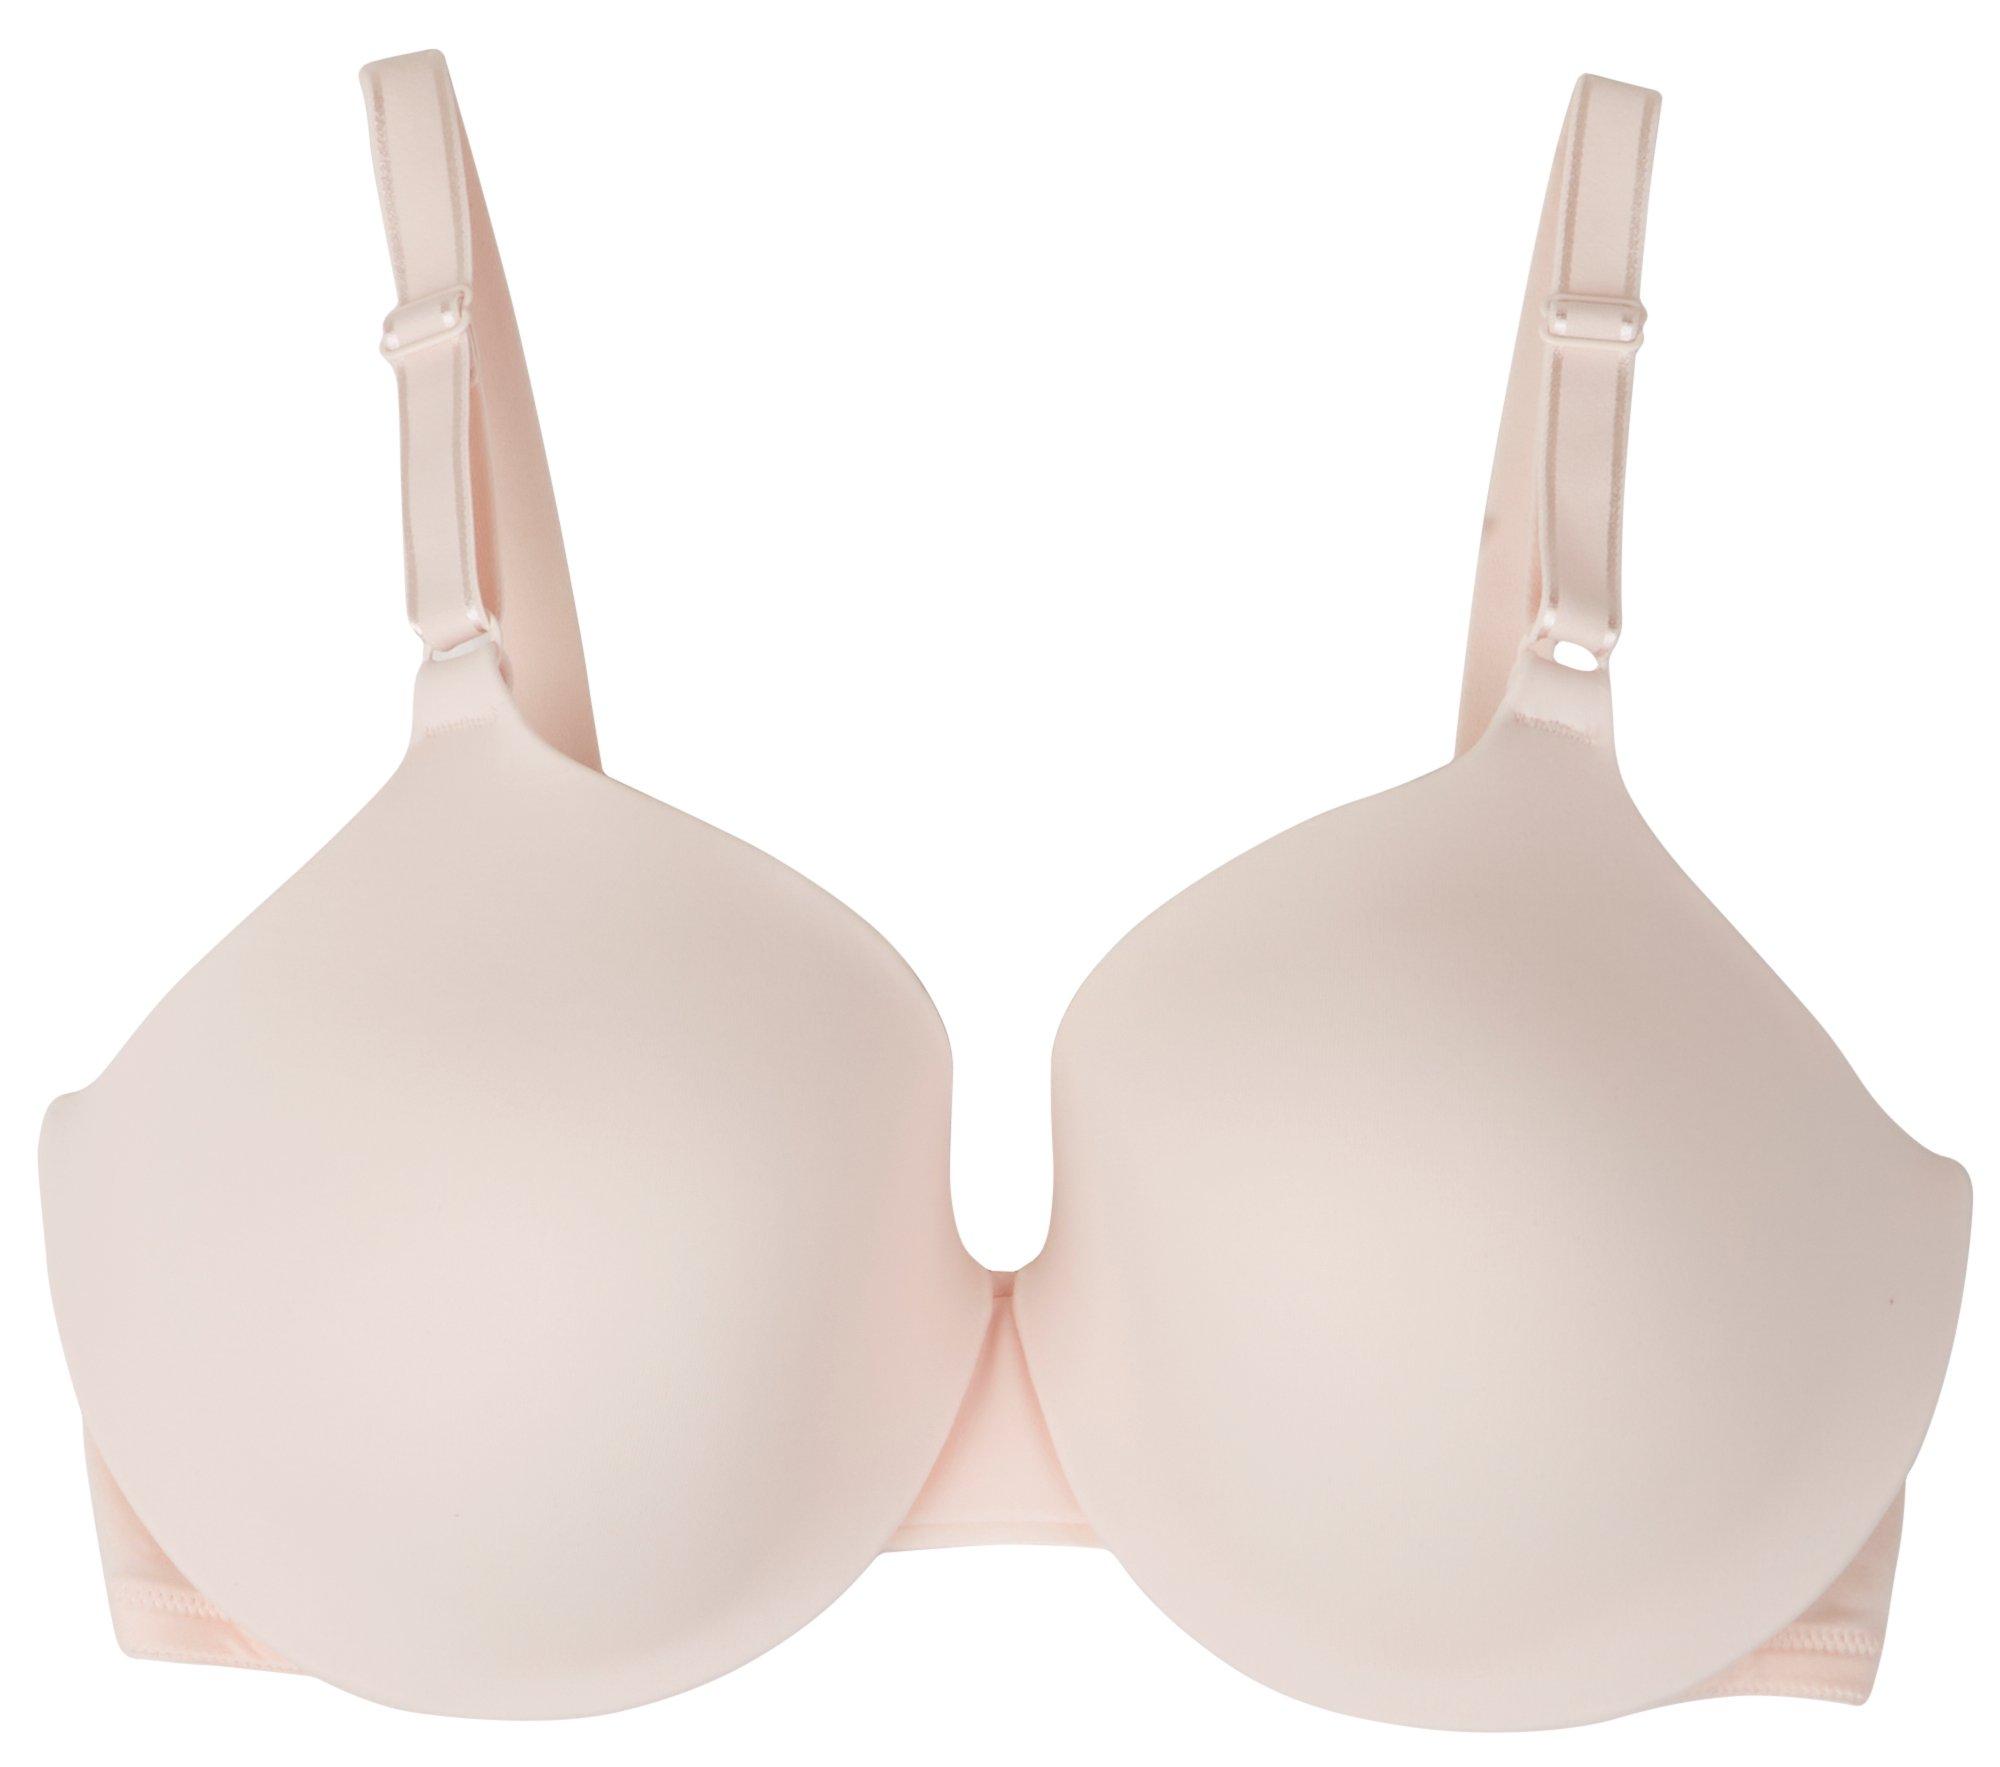 fabsdeal on X: Kalyani full coverage padded fancy bra at #FABSDEAL only  Rs. 245/- buy today.  #womenlingerie   / X